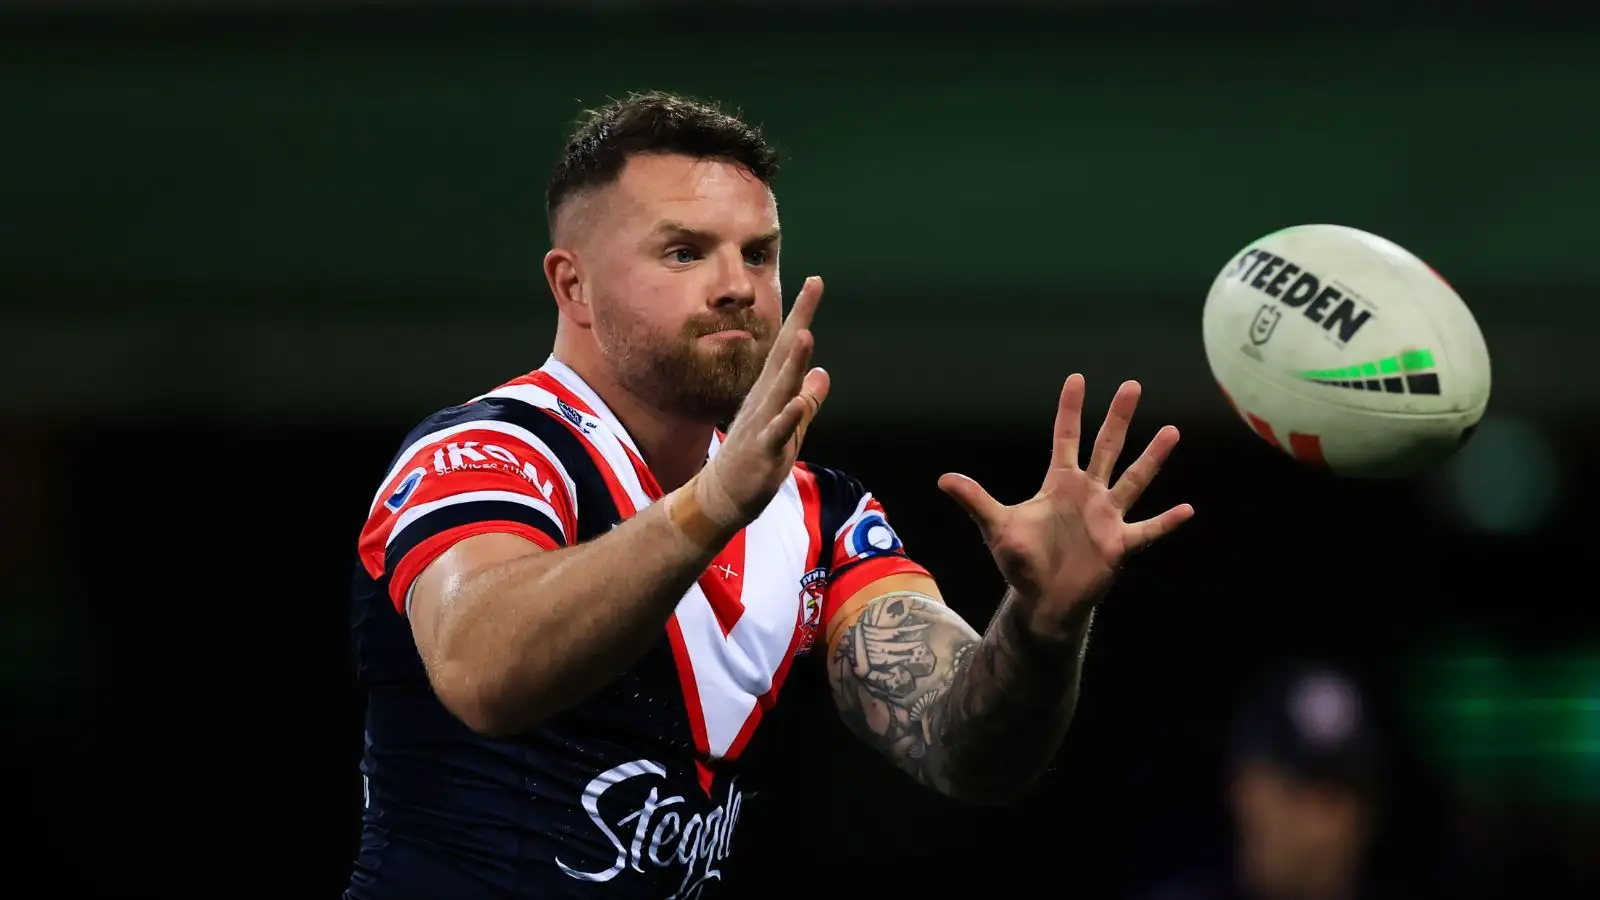 Sydney Roosters announce five more departures, including confirmed Super League move & ex-New South Wales representative